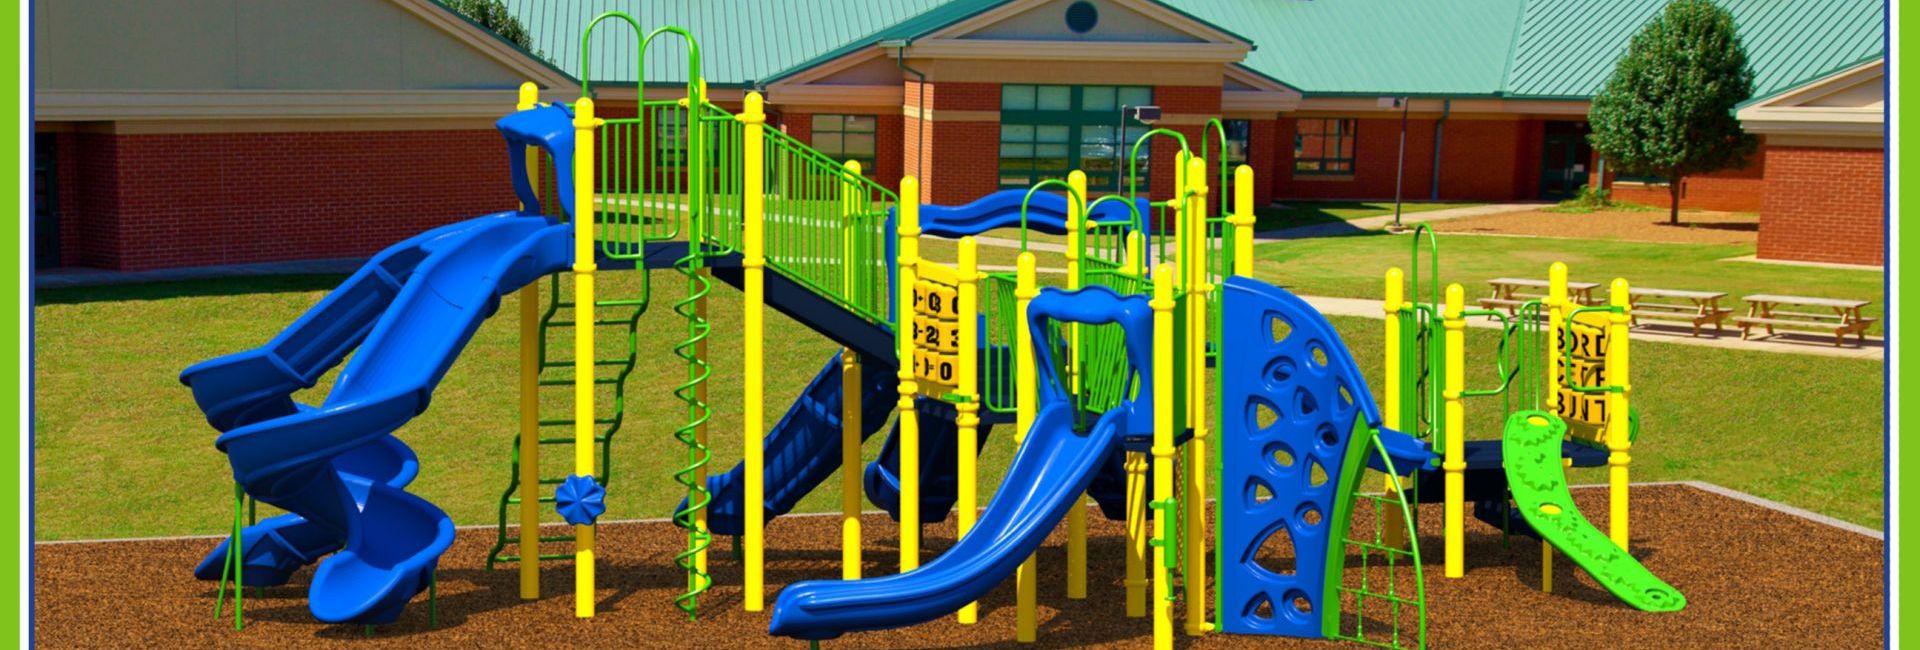 Featured image of Park with lime green, yellow, and blue slides in front of Elementary School 